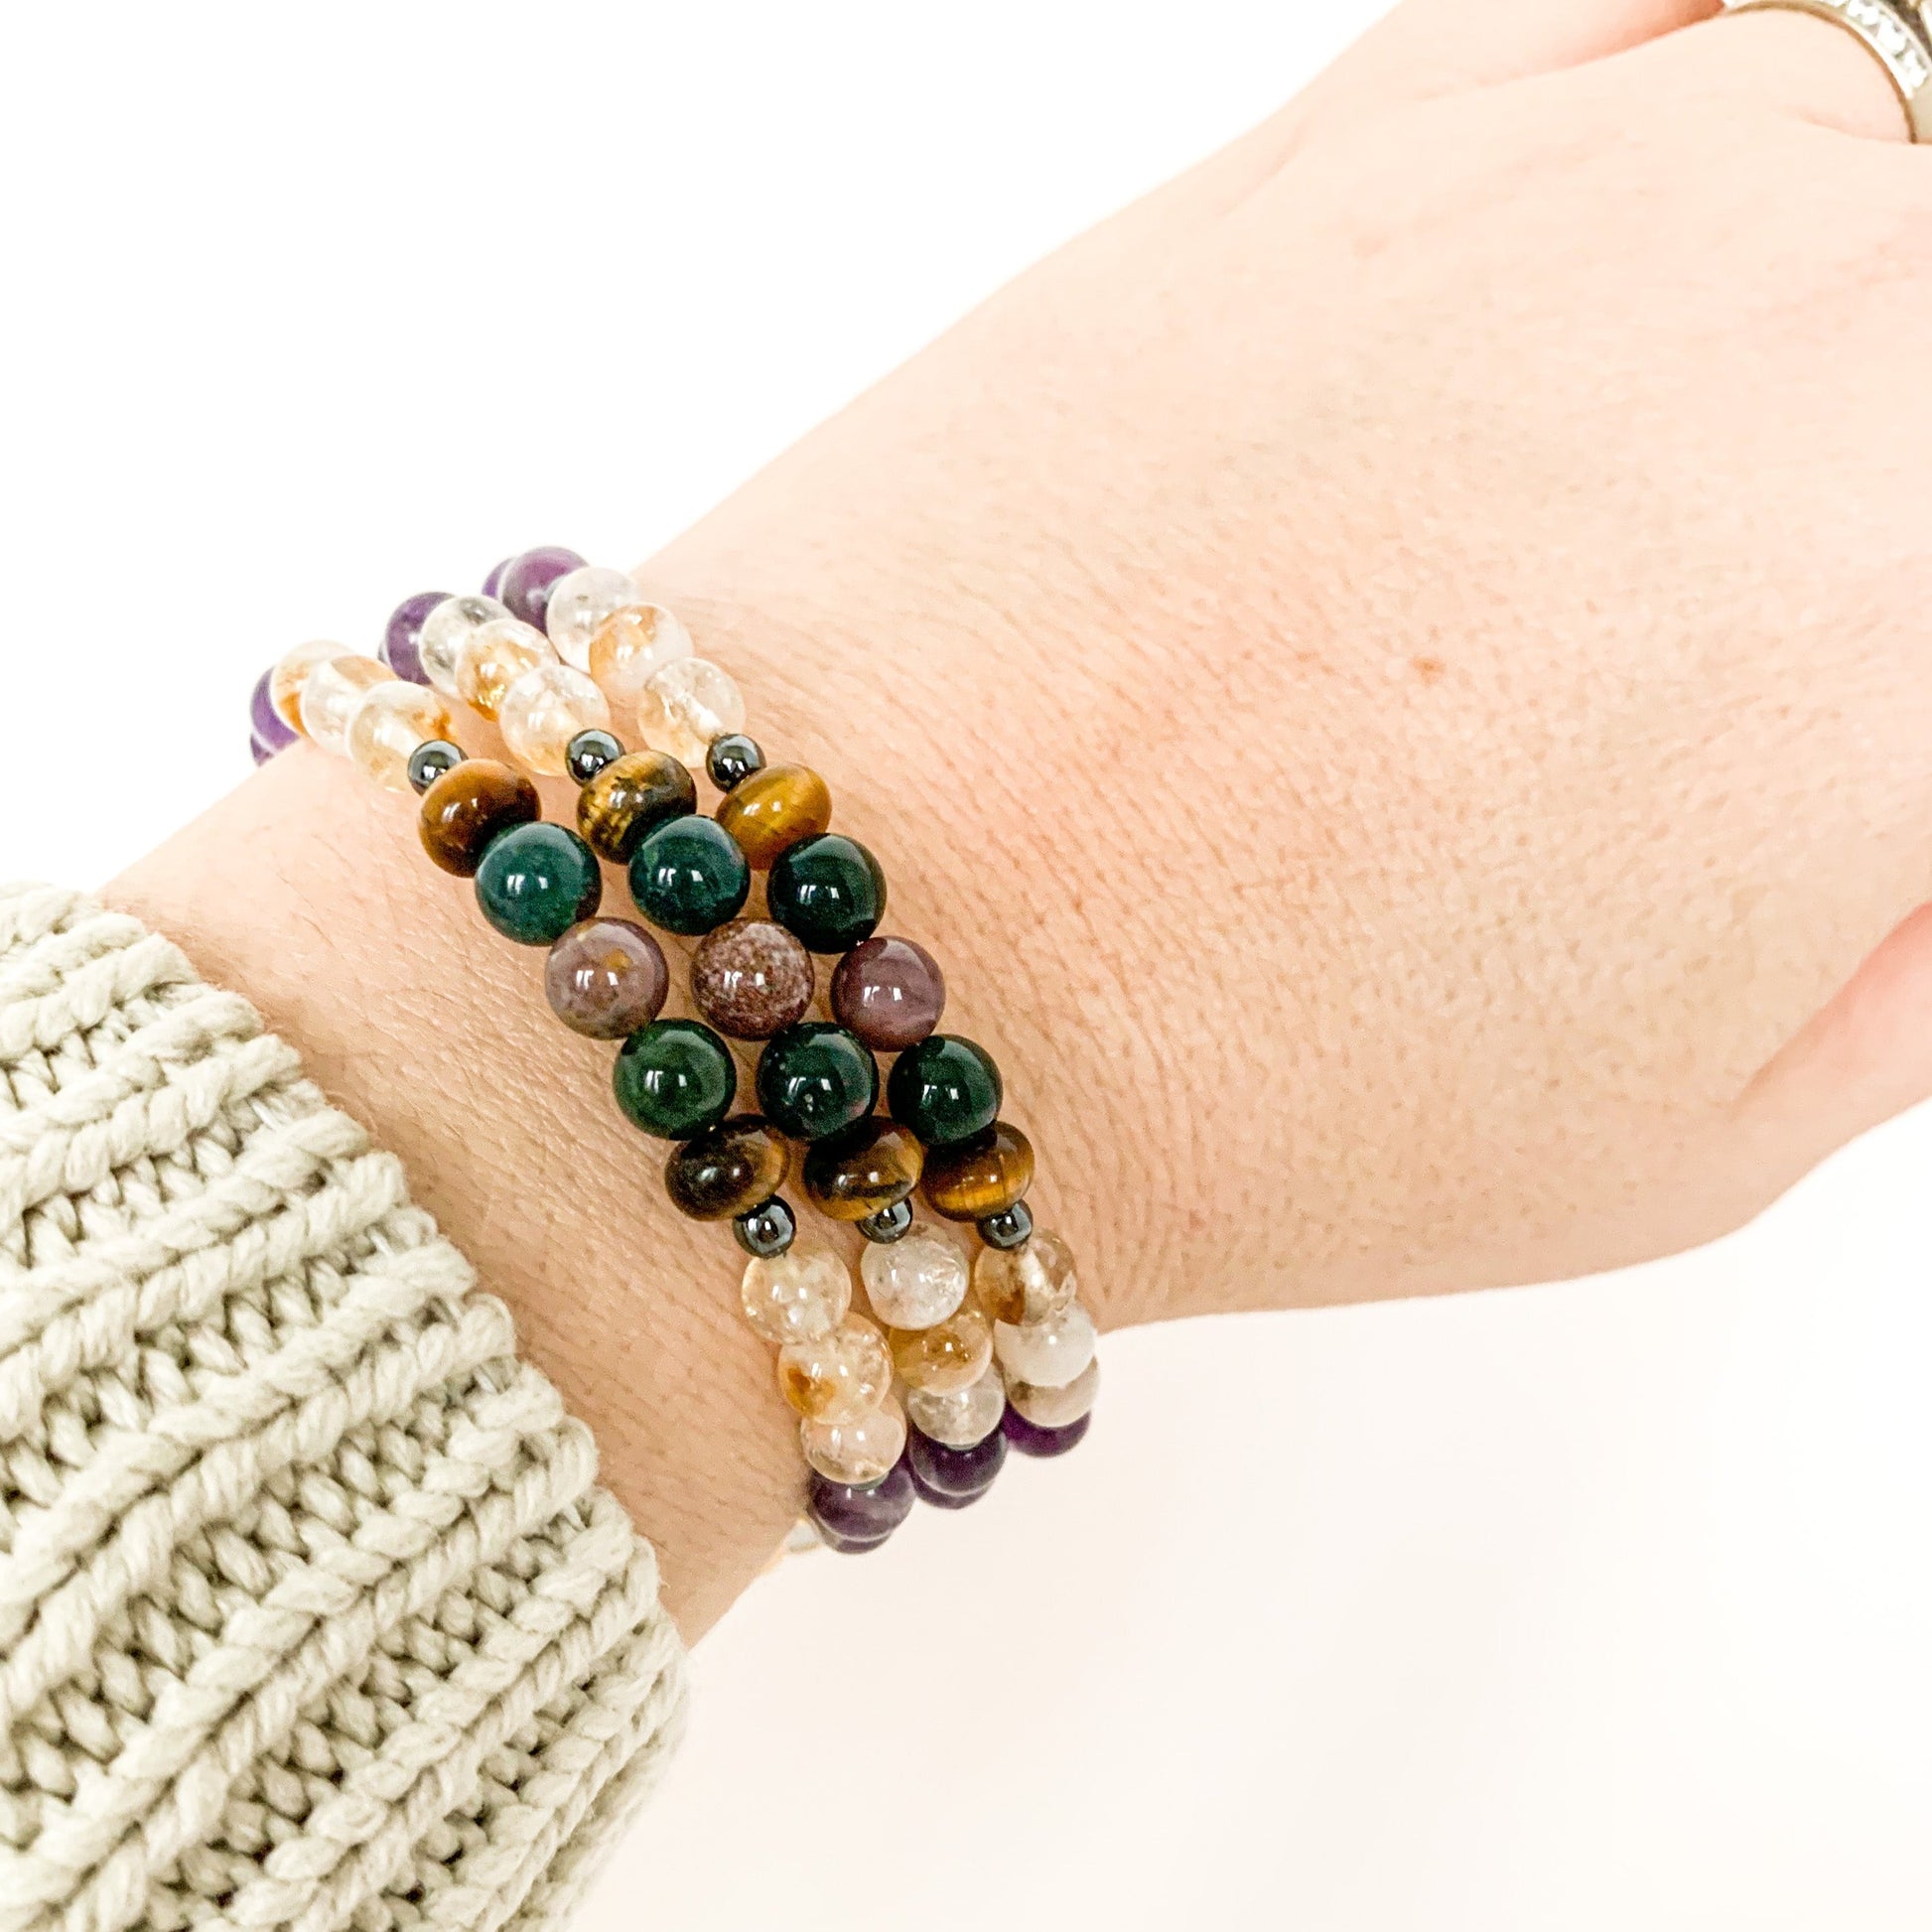 Women's Bracelets With Charms | Rock This Way Crystal Shop